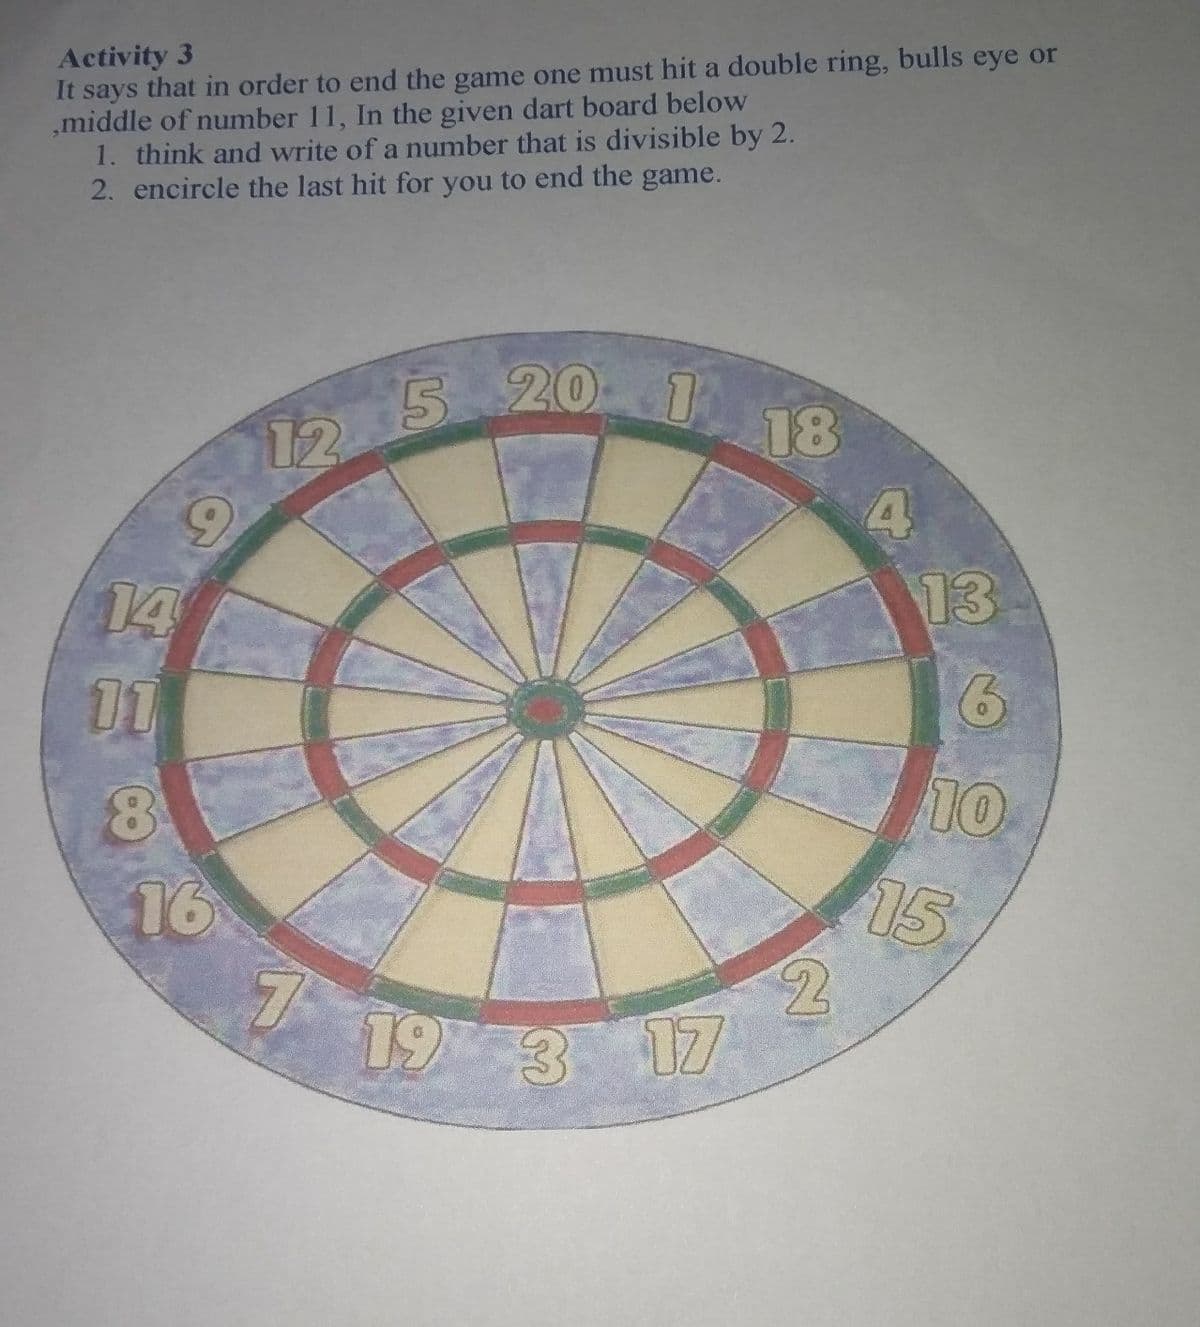 Activity 3
It says that in order to end the game one must hit a double ring, bulls eye or
,middle of number 11, In the given dart board below
1. think and write of a number that is divisible by 2.
2. encircle the last hit for you to end the game.
5 20
18
12
13
14
11
10
15
16
7
19 3 17
